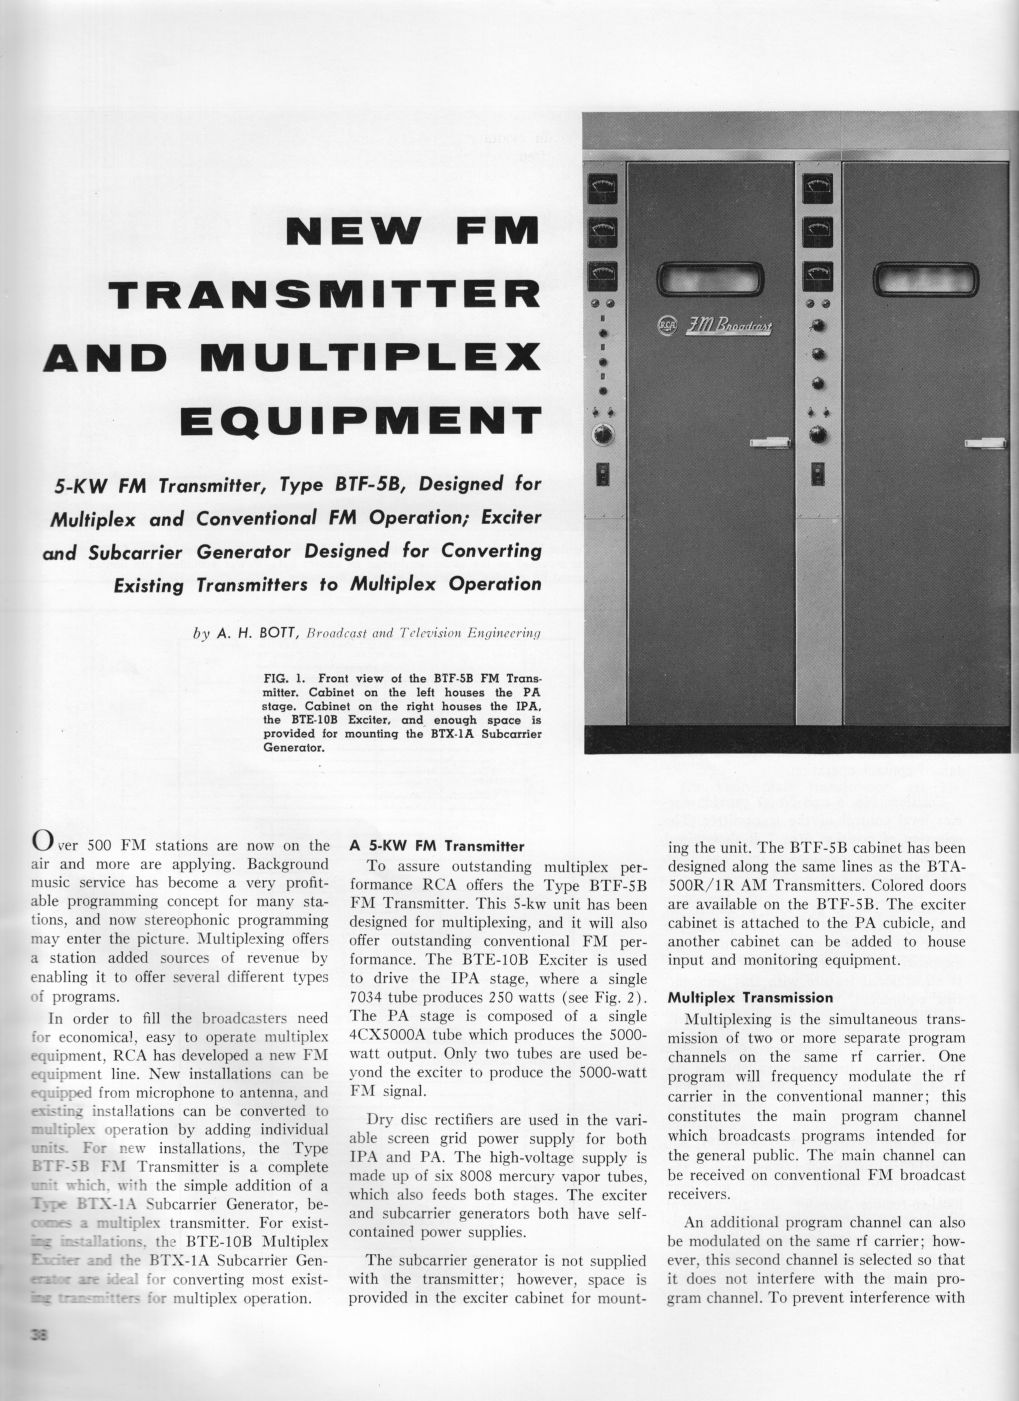 RCA BTE-10B Direct FM Exciter, page 1